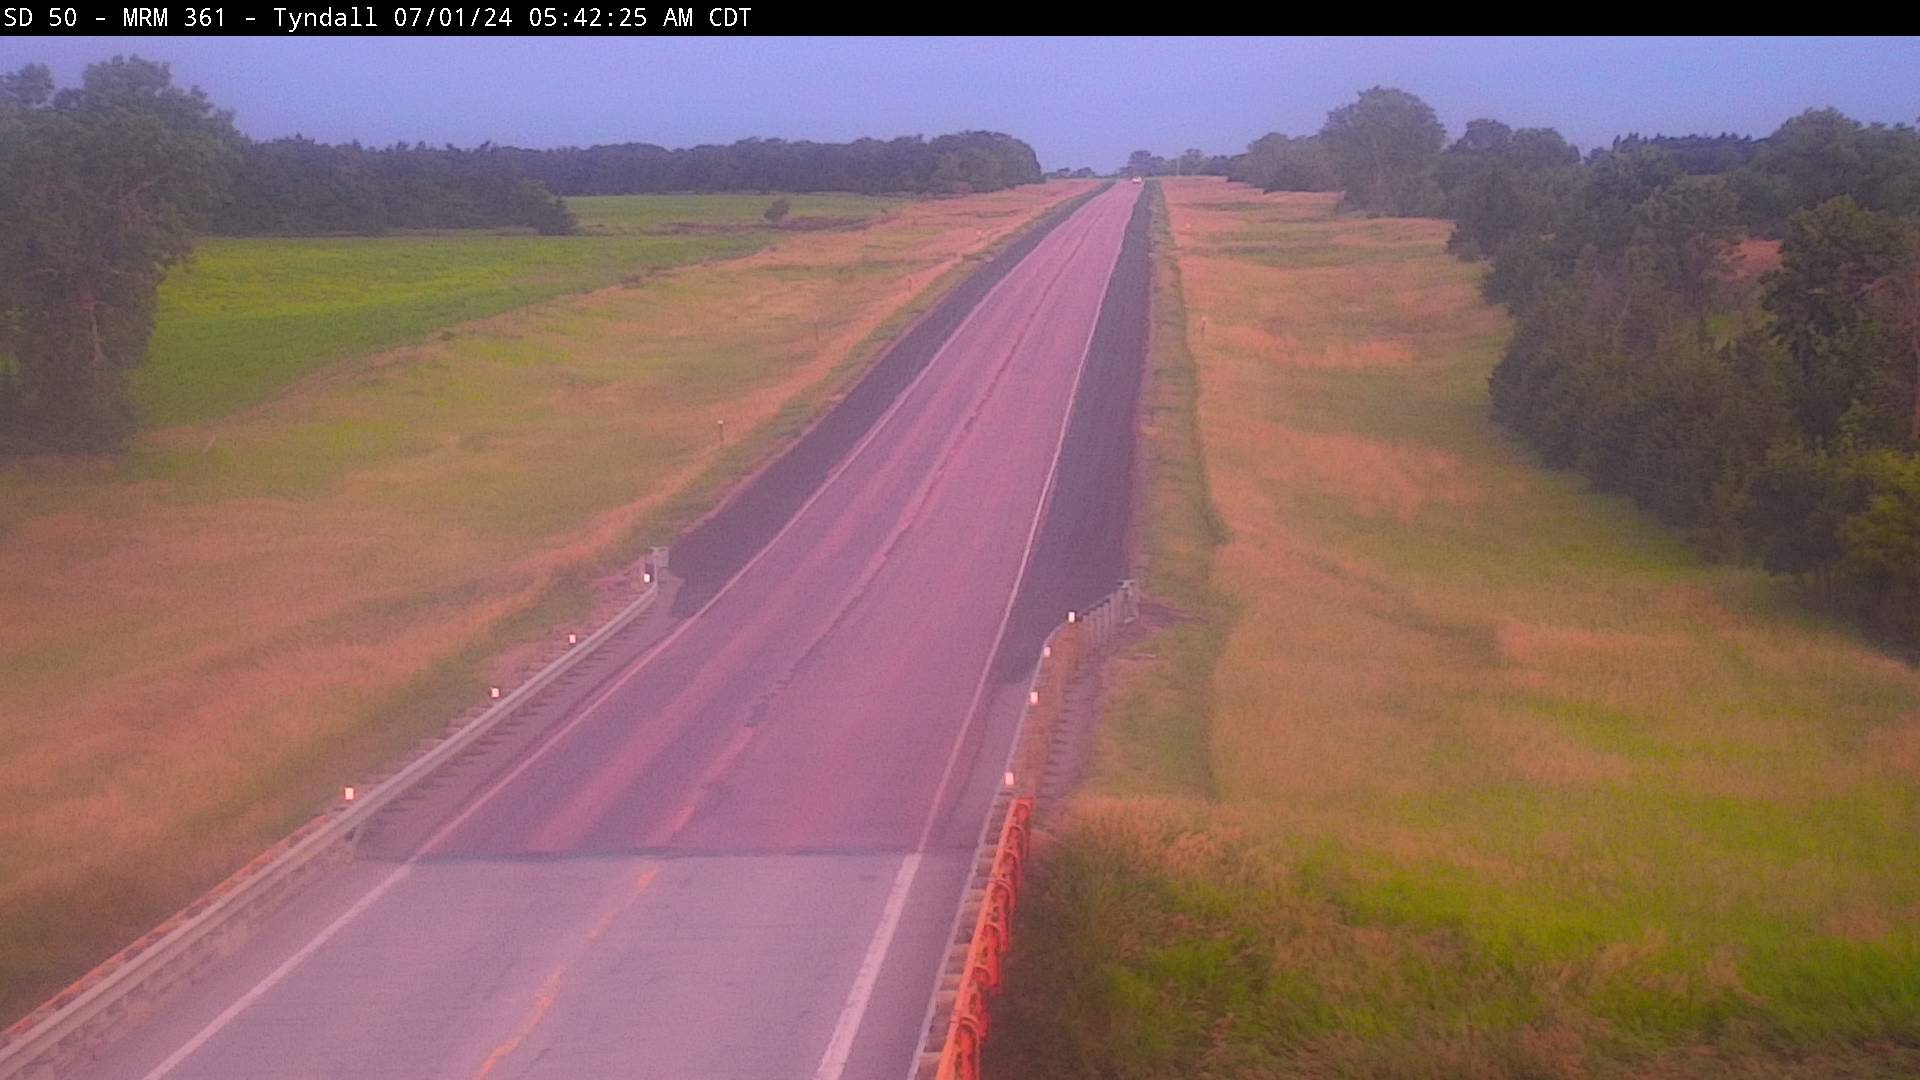 5 miles east of town along SD-50 @ MP 361 - West Traffic Camera